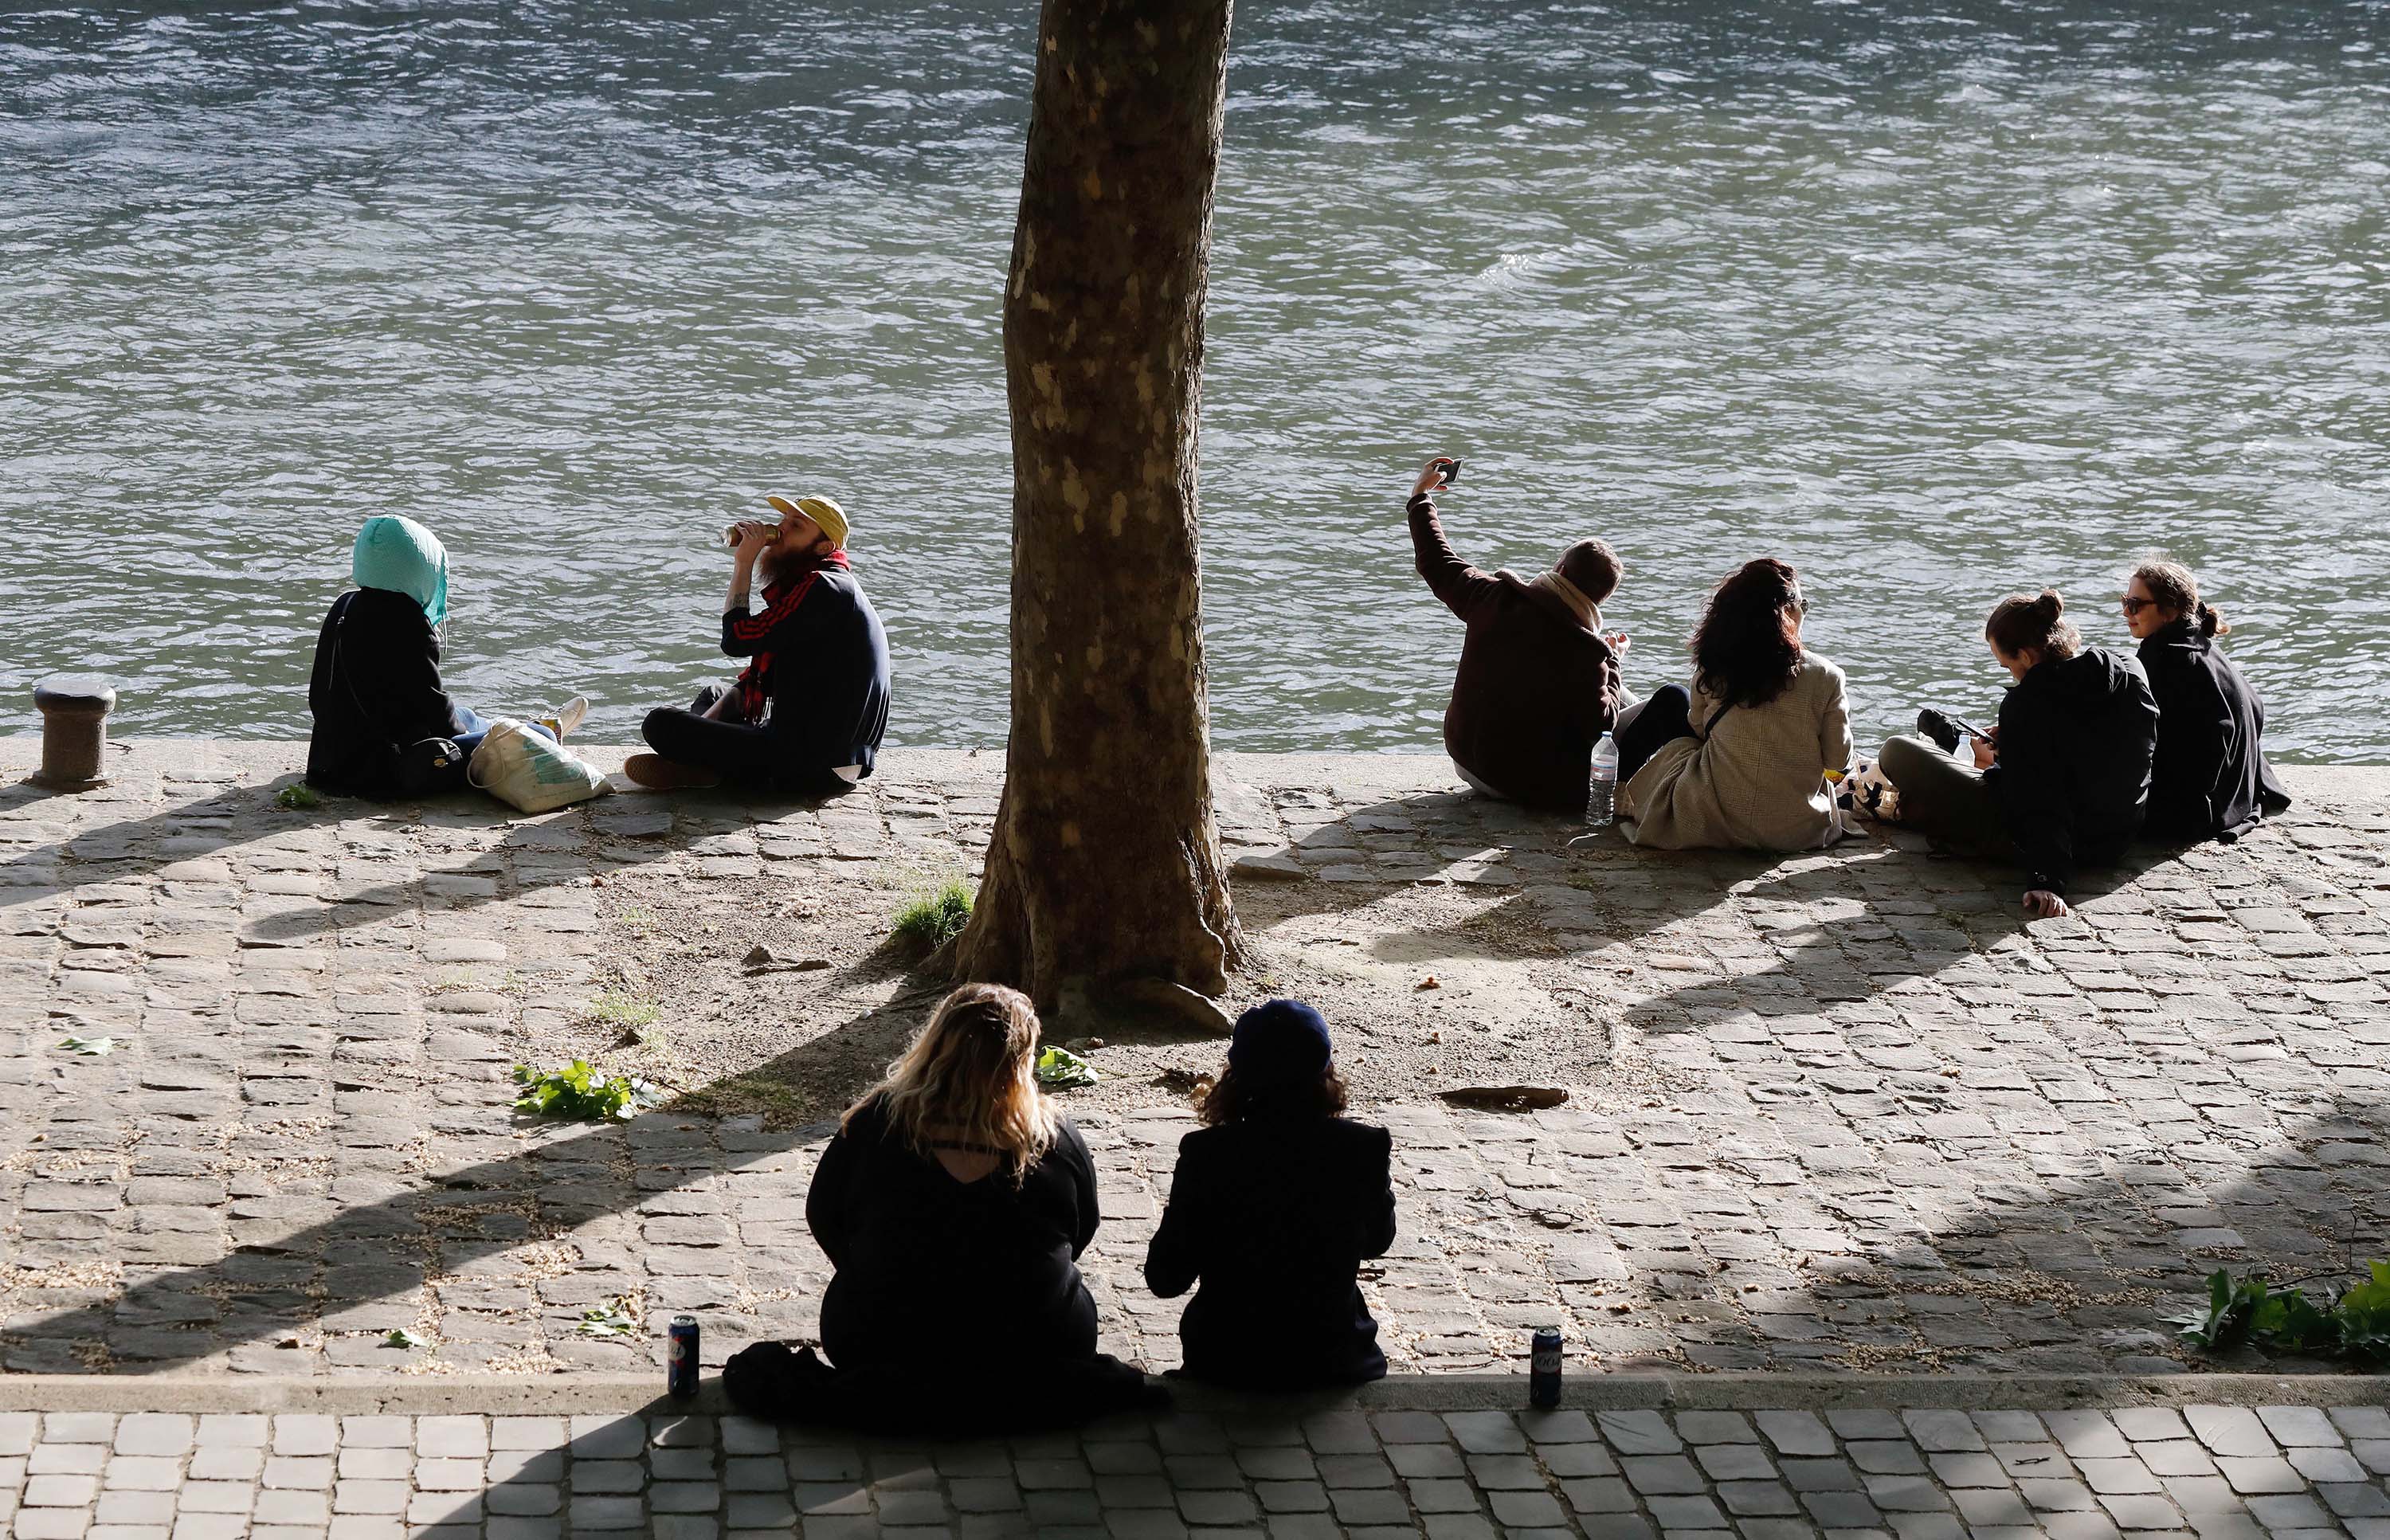 People gather along the banks of the river Seine in Paris on May 11, as France eased lockdown measures.